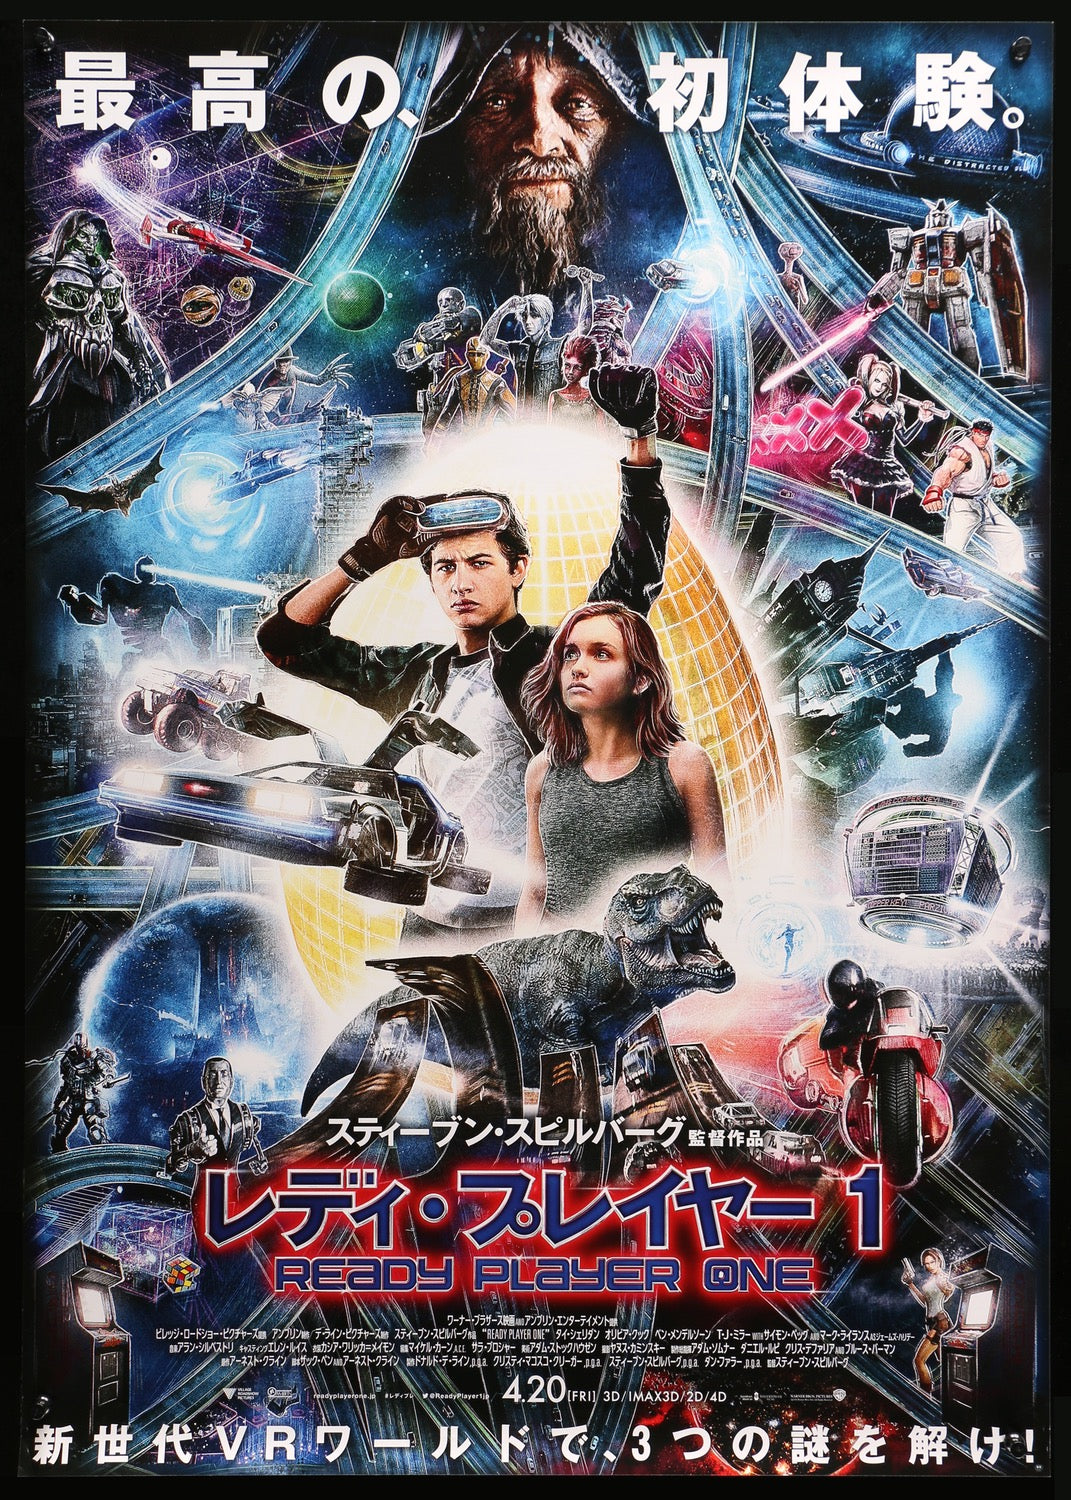 READY PLAYER ONE Japanese B2 movie poster STEVEN SPIELBERG 2018 NM